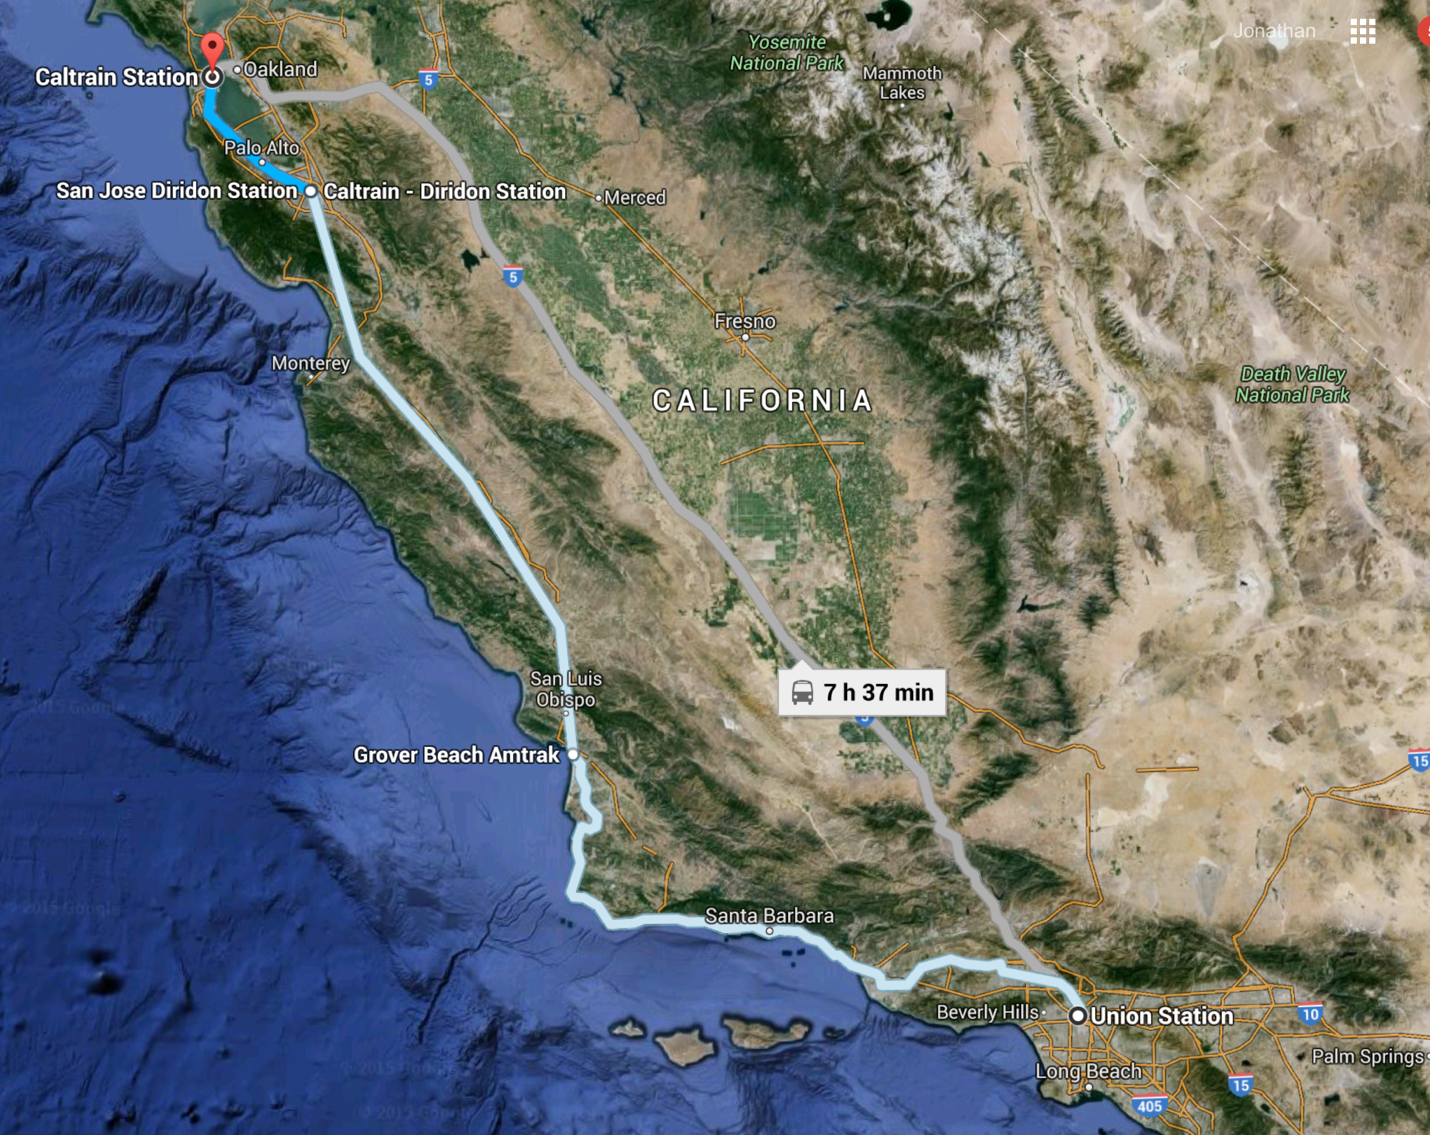 /users/jonathan/desktop/train route from la to san fran.png